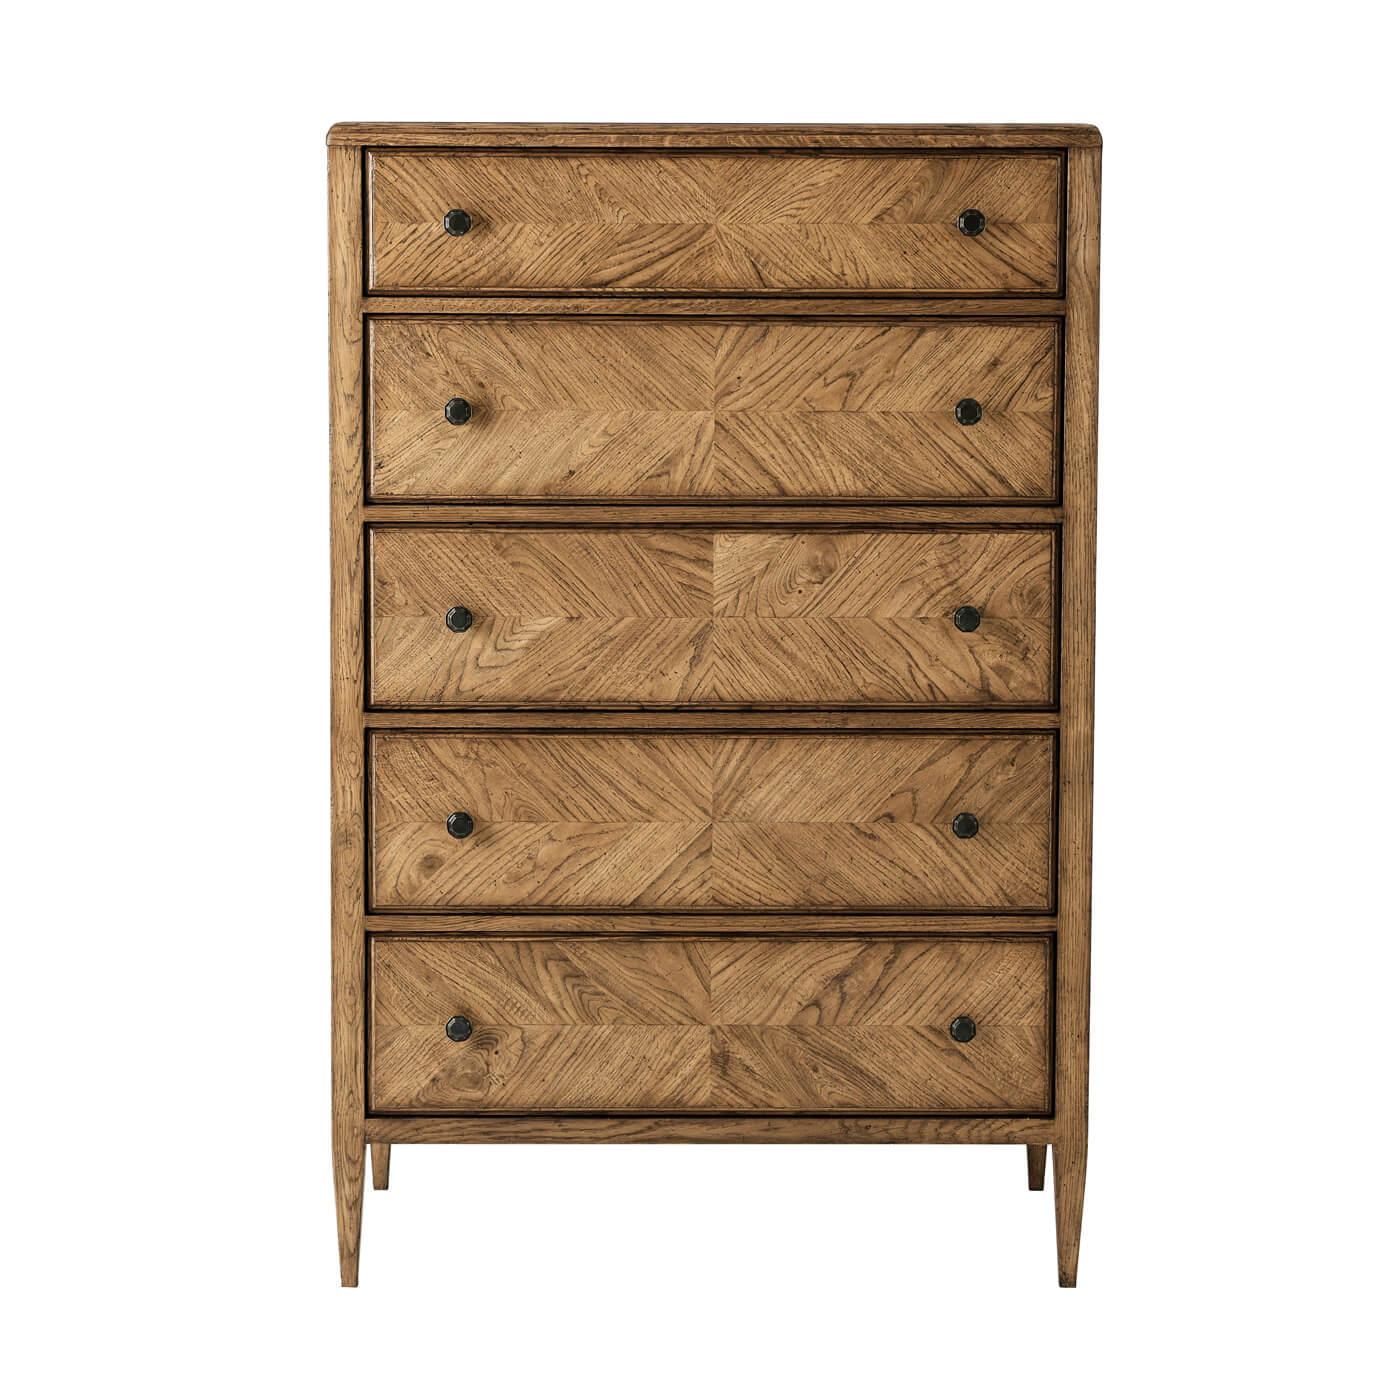 A neo cassic style oak parquetry tall chest of drawers with mirrored herringbone oak parquetry including five deep drawers accented with Verde Bronze finished handles on tapered oak legs in our Dwan finish.

Dimensions: 36